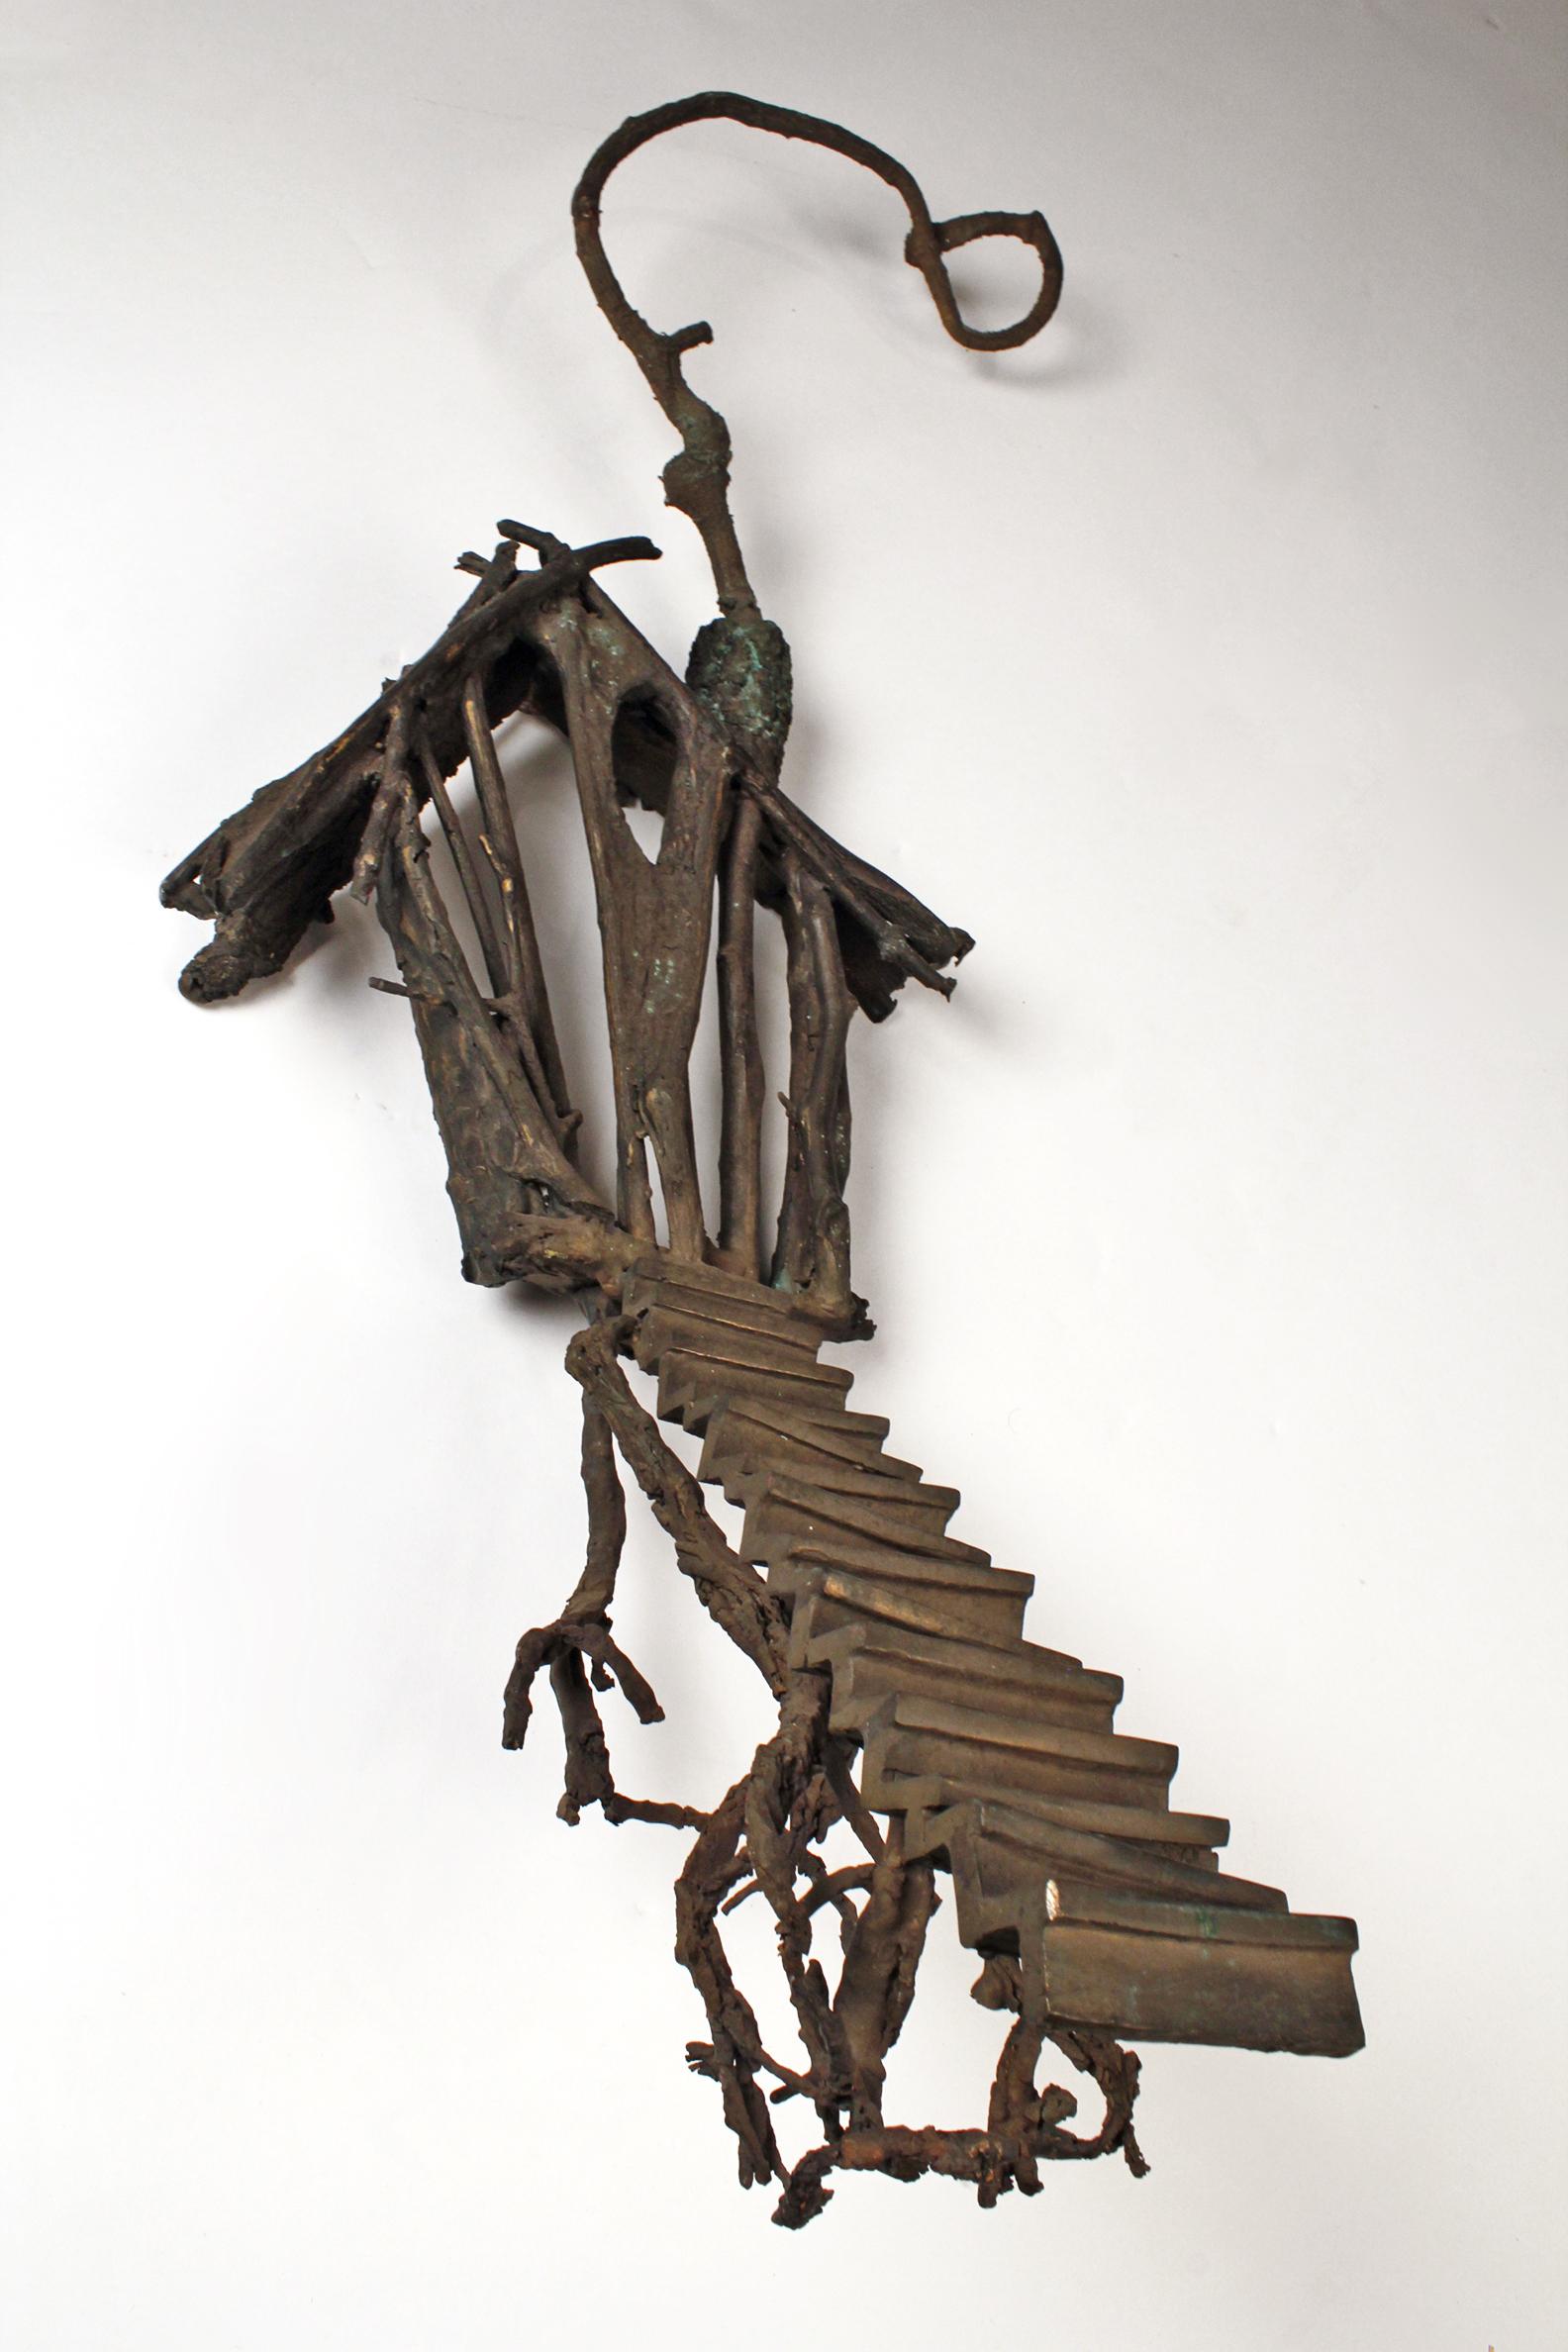 Exceptional wall mount treehouse sculpture. Crafted from lost wax castings of actual twigs and branches. Made by a mysterious Texas artist. Unsigned.